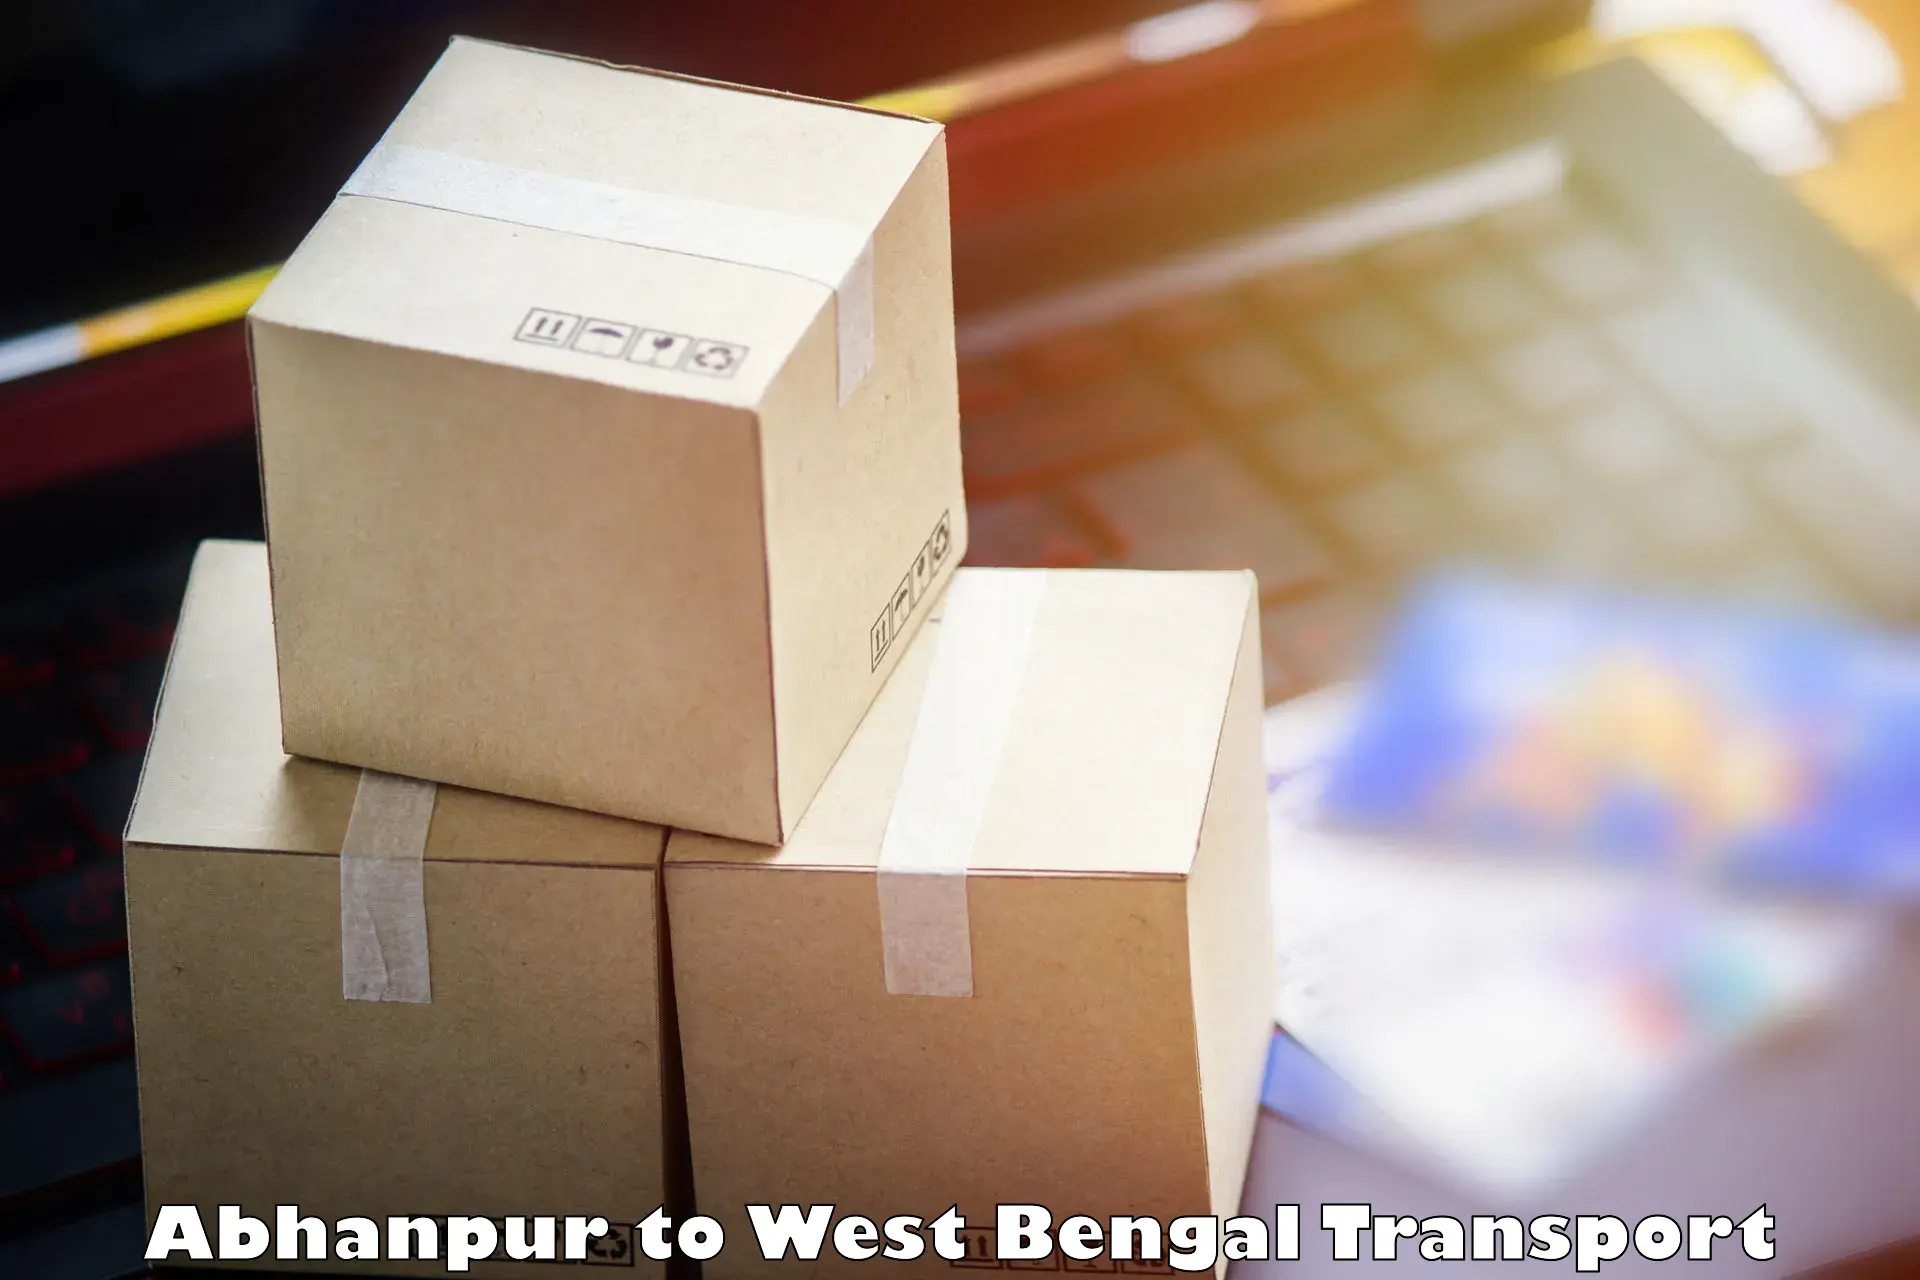 Cargo transport services Abhanpur to Midnapore